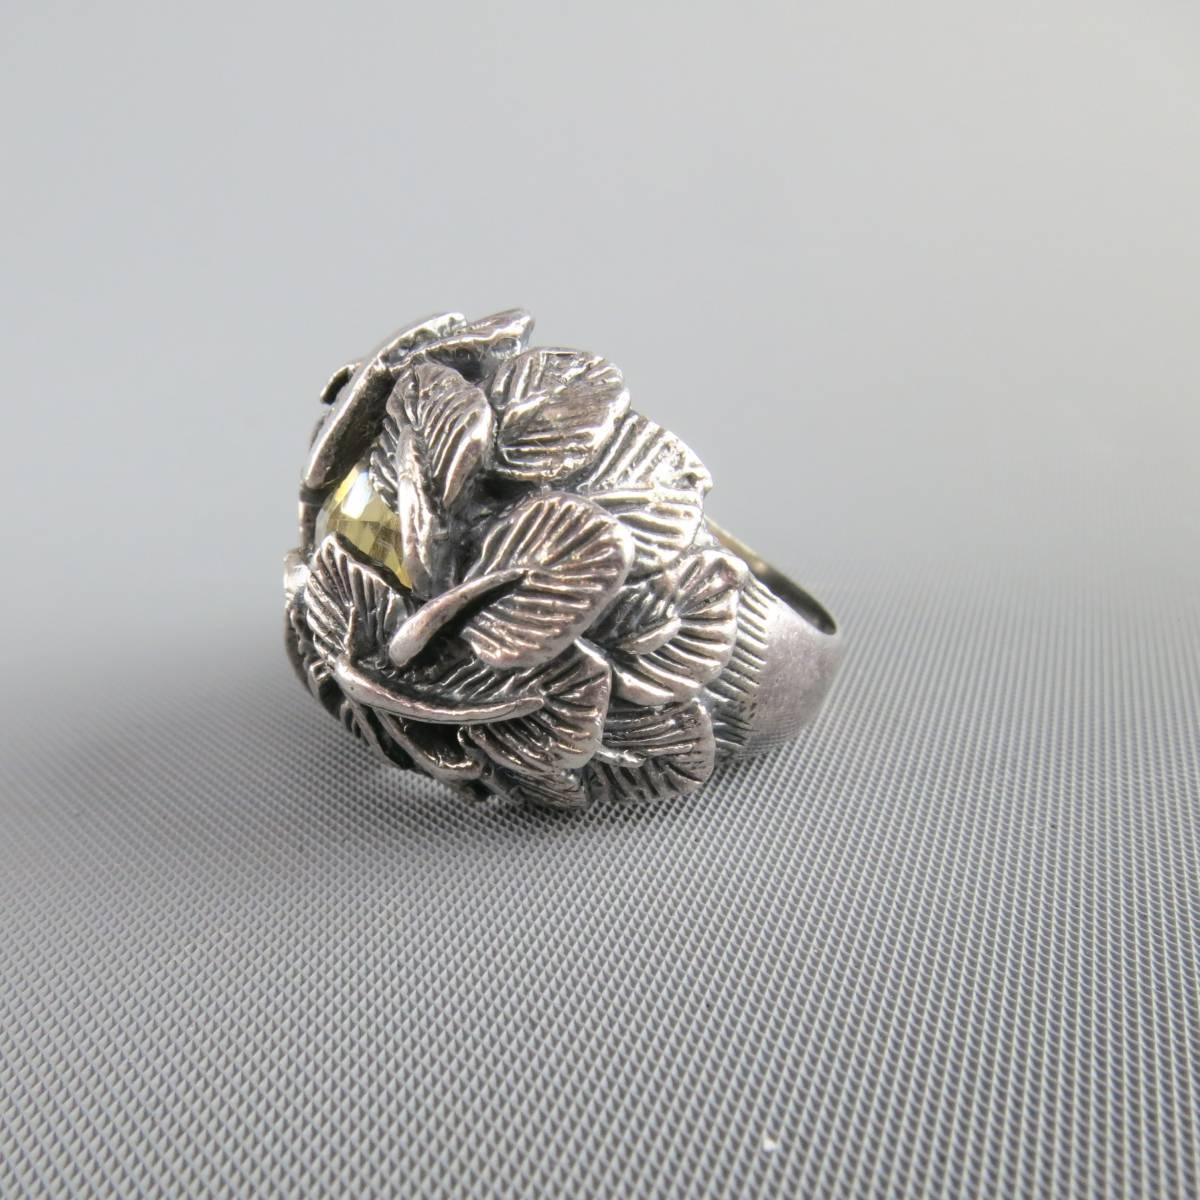 UGO CACCIATORI foliage ring comes in a leaf engraved sterling silver with yellow gem stone.
 
Excellent Pre-Owned Condition.
 
Size: 8
